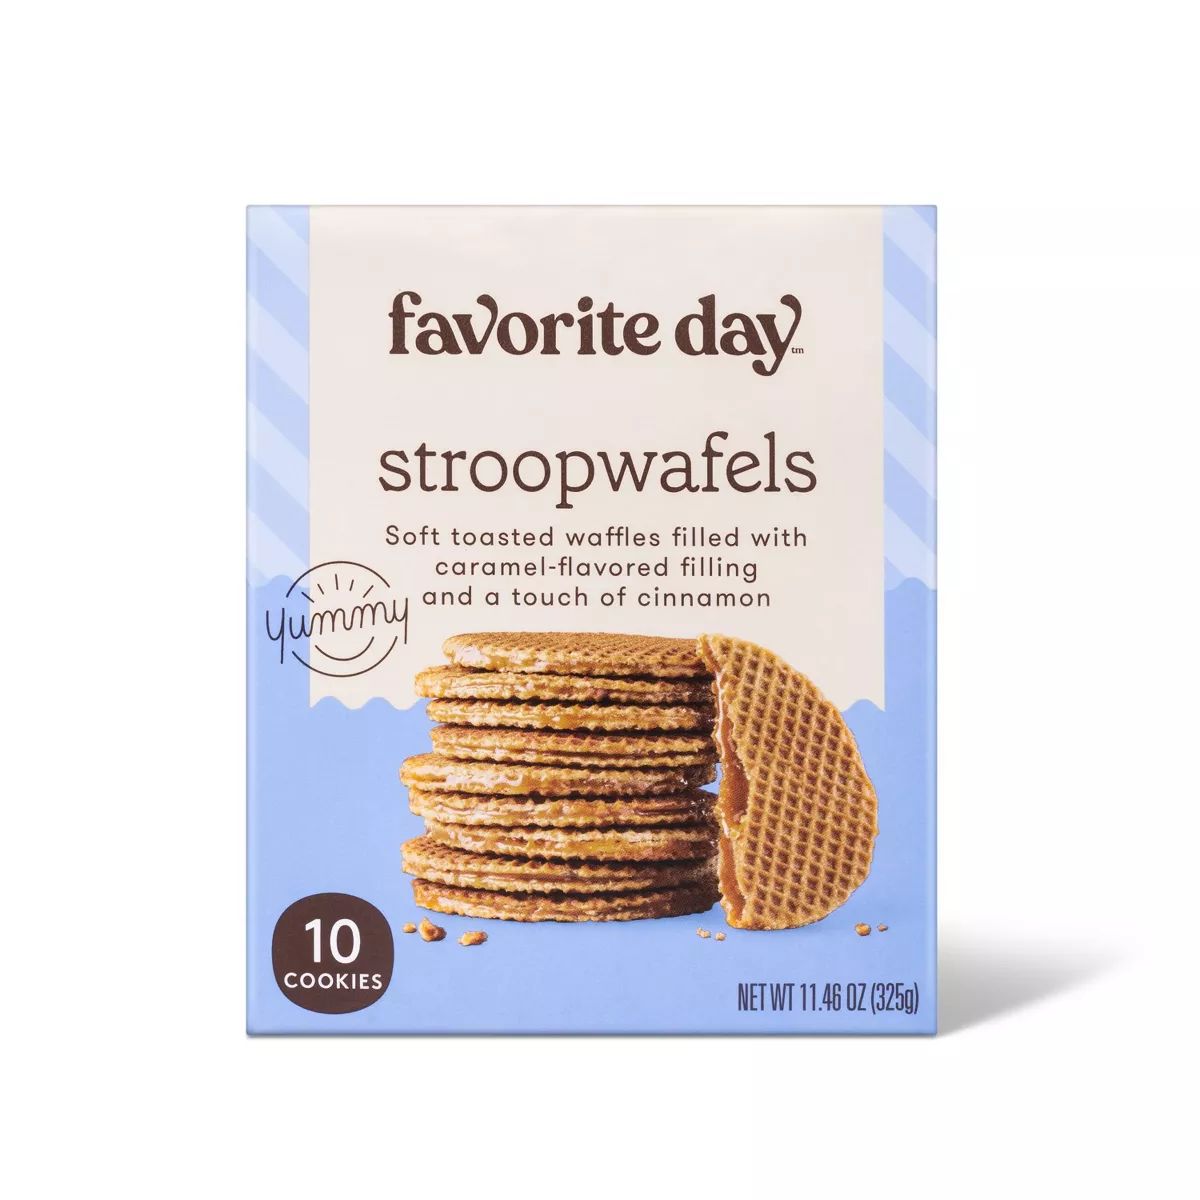 Stroopwafel Cookies Filled with Caramel - 10ct - Favorite Day™ | Target